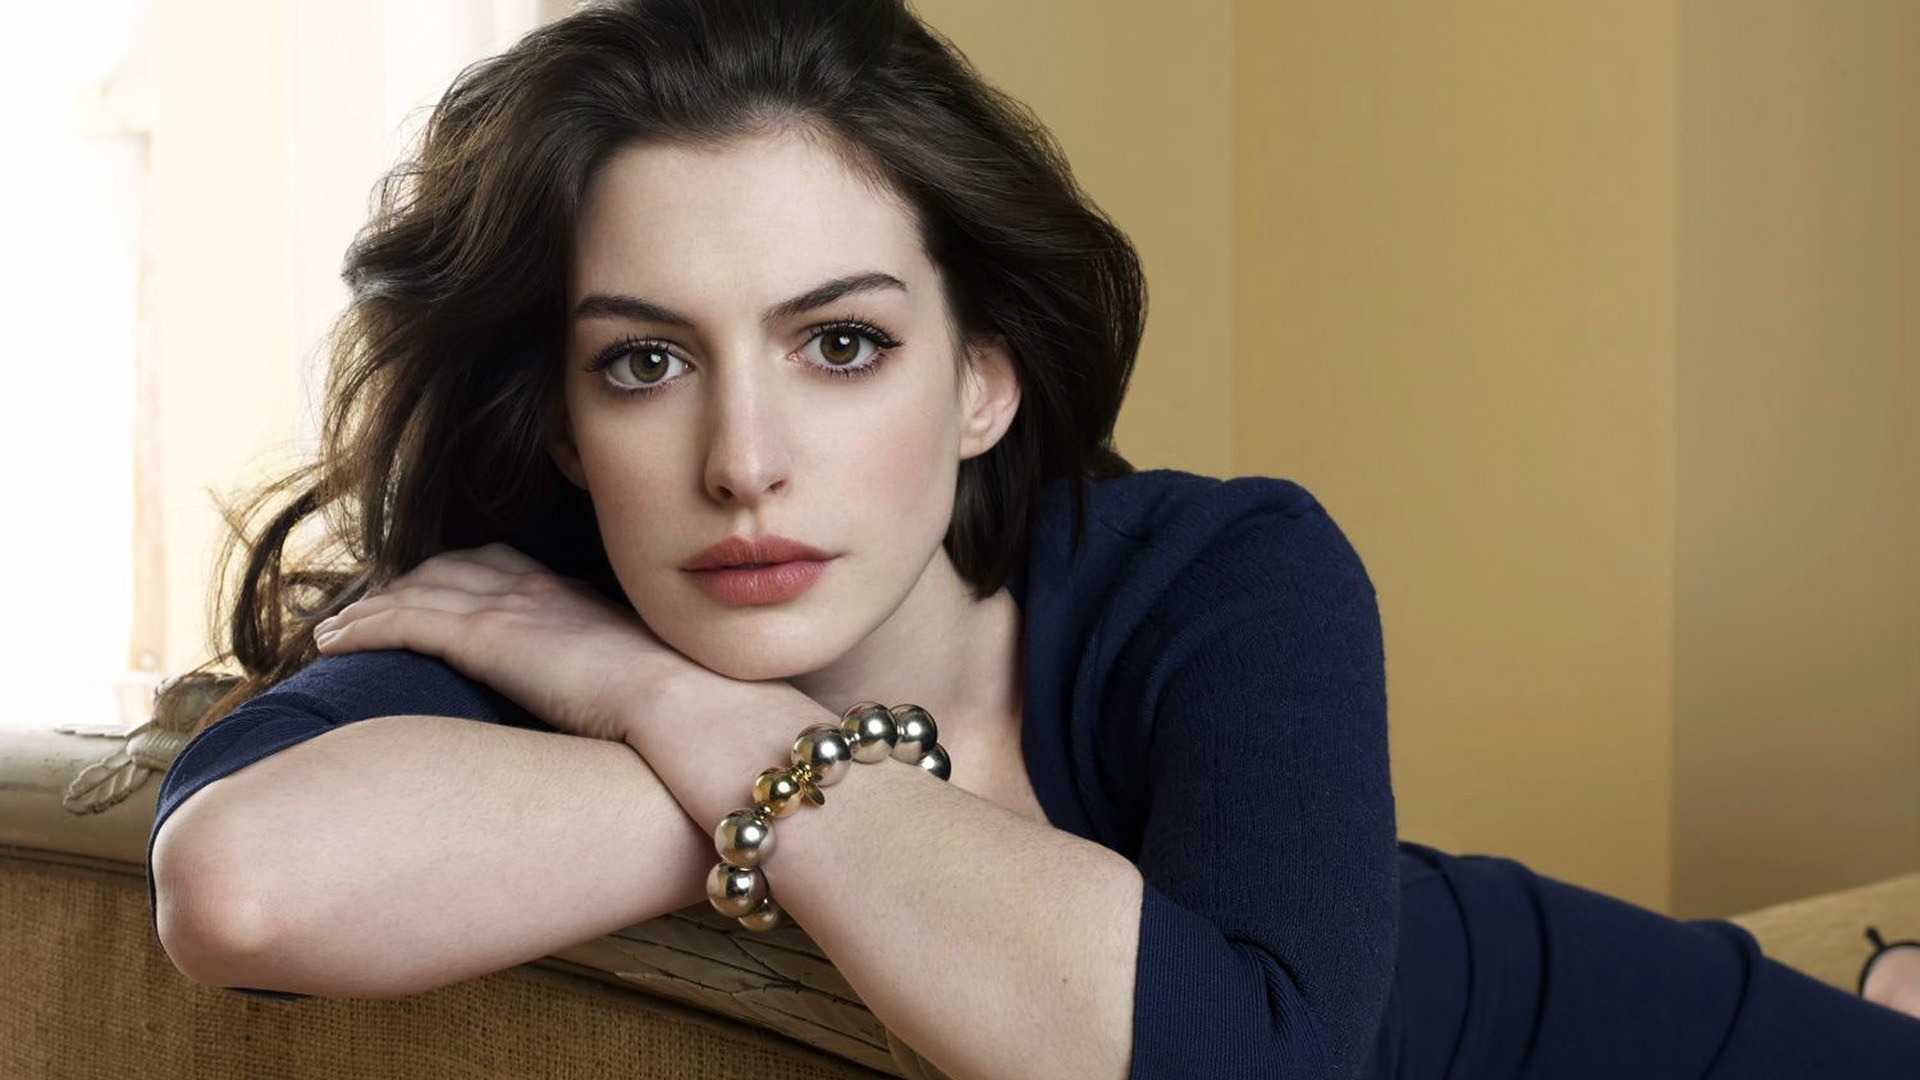 hot-anne-hathaway-wallpaper@wallpaperpassion | bhadup | Flickr